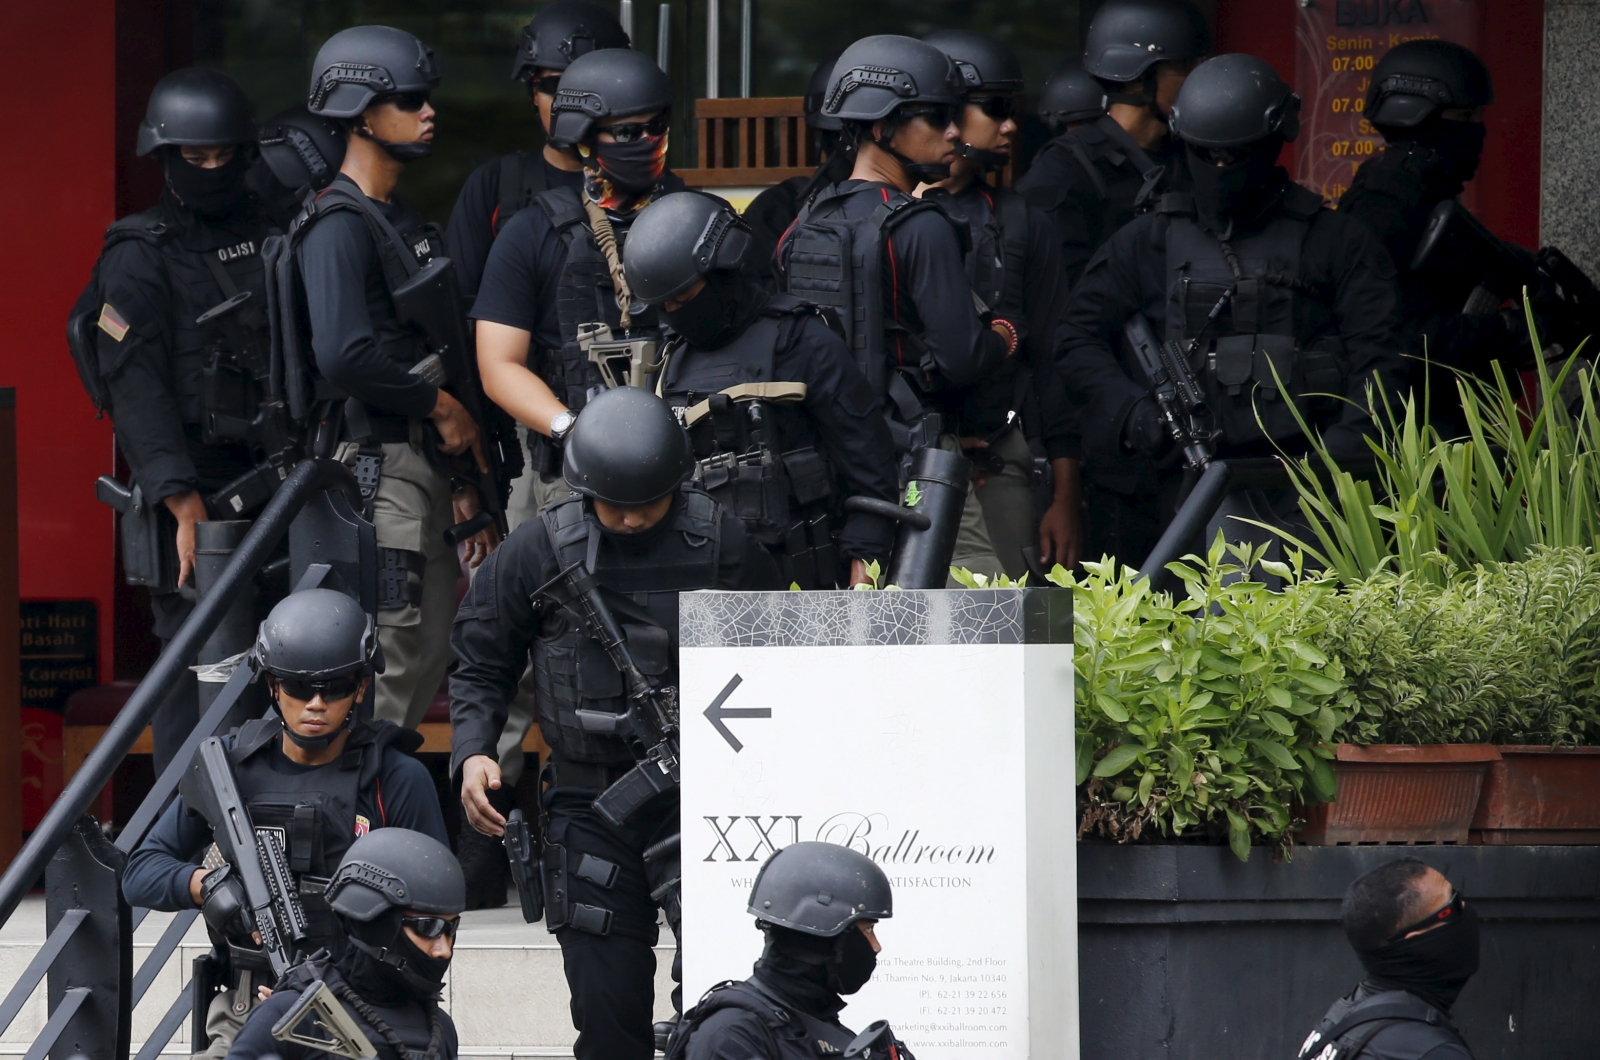 Indonesia: Police shoot suspected Islamist militant after attack on officials